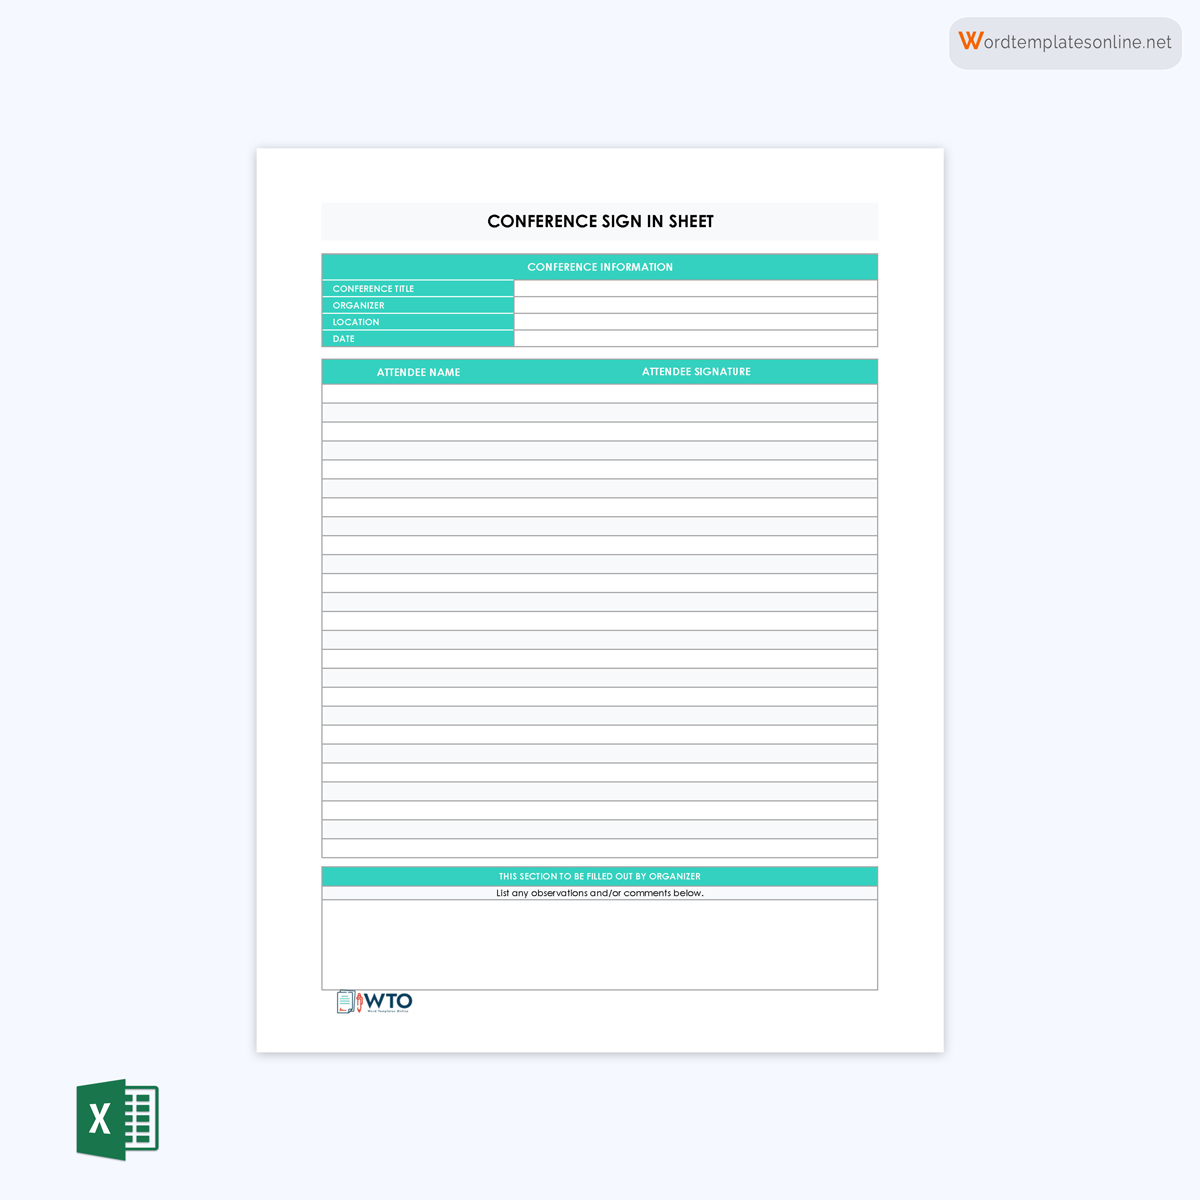 Conference Sign-in Sheet In excel free download